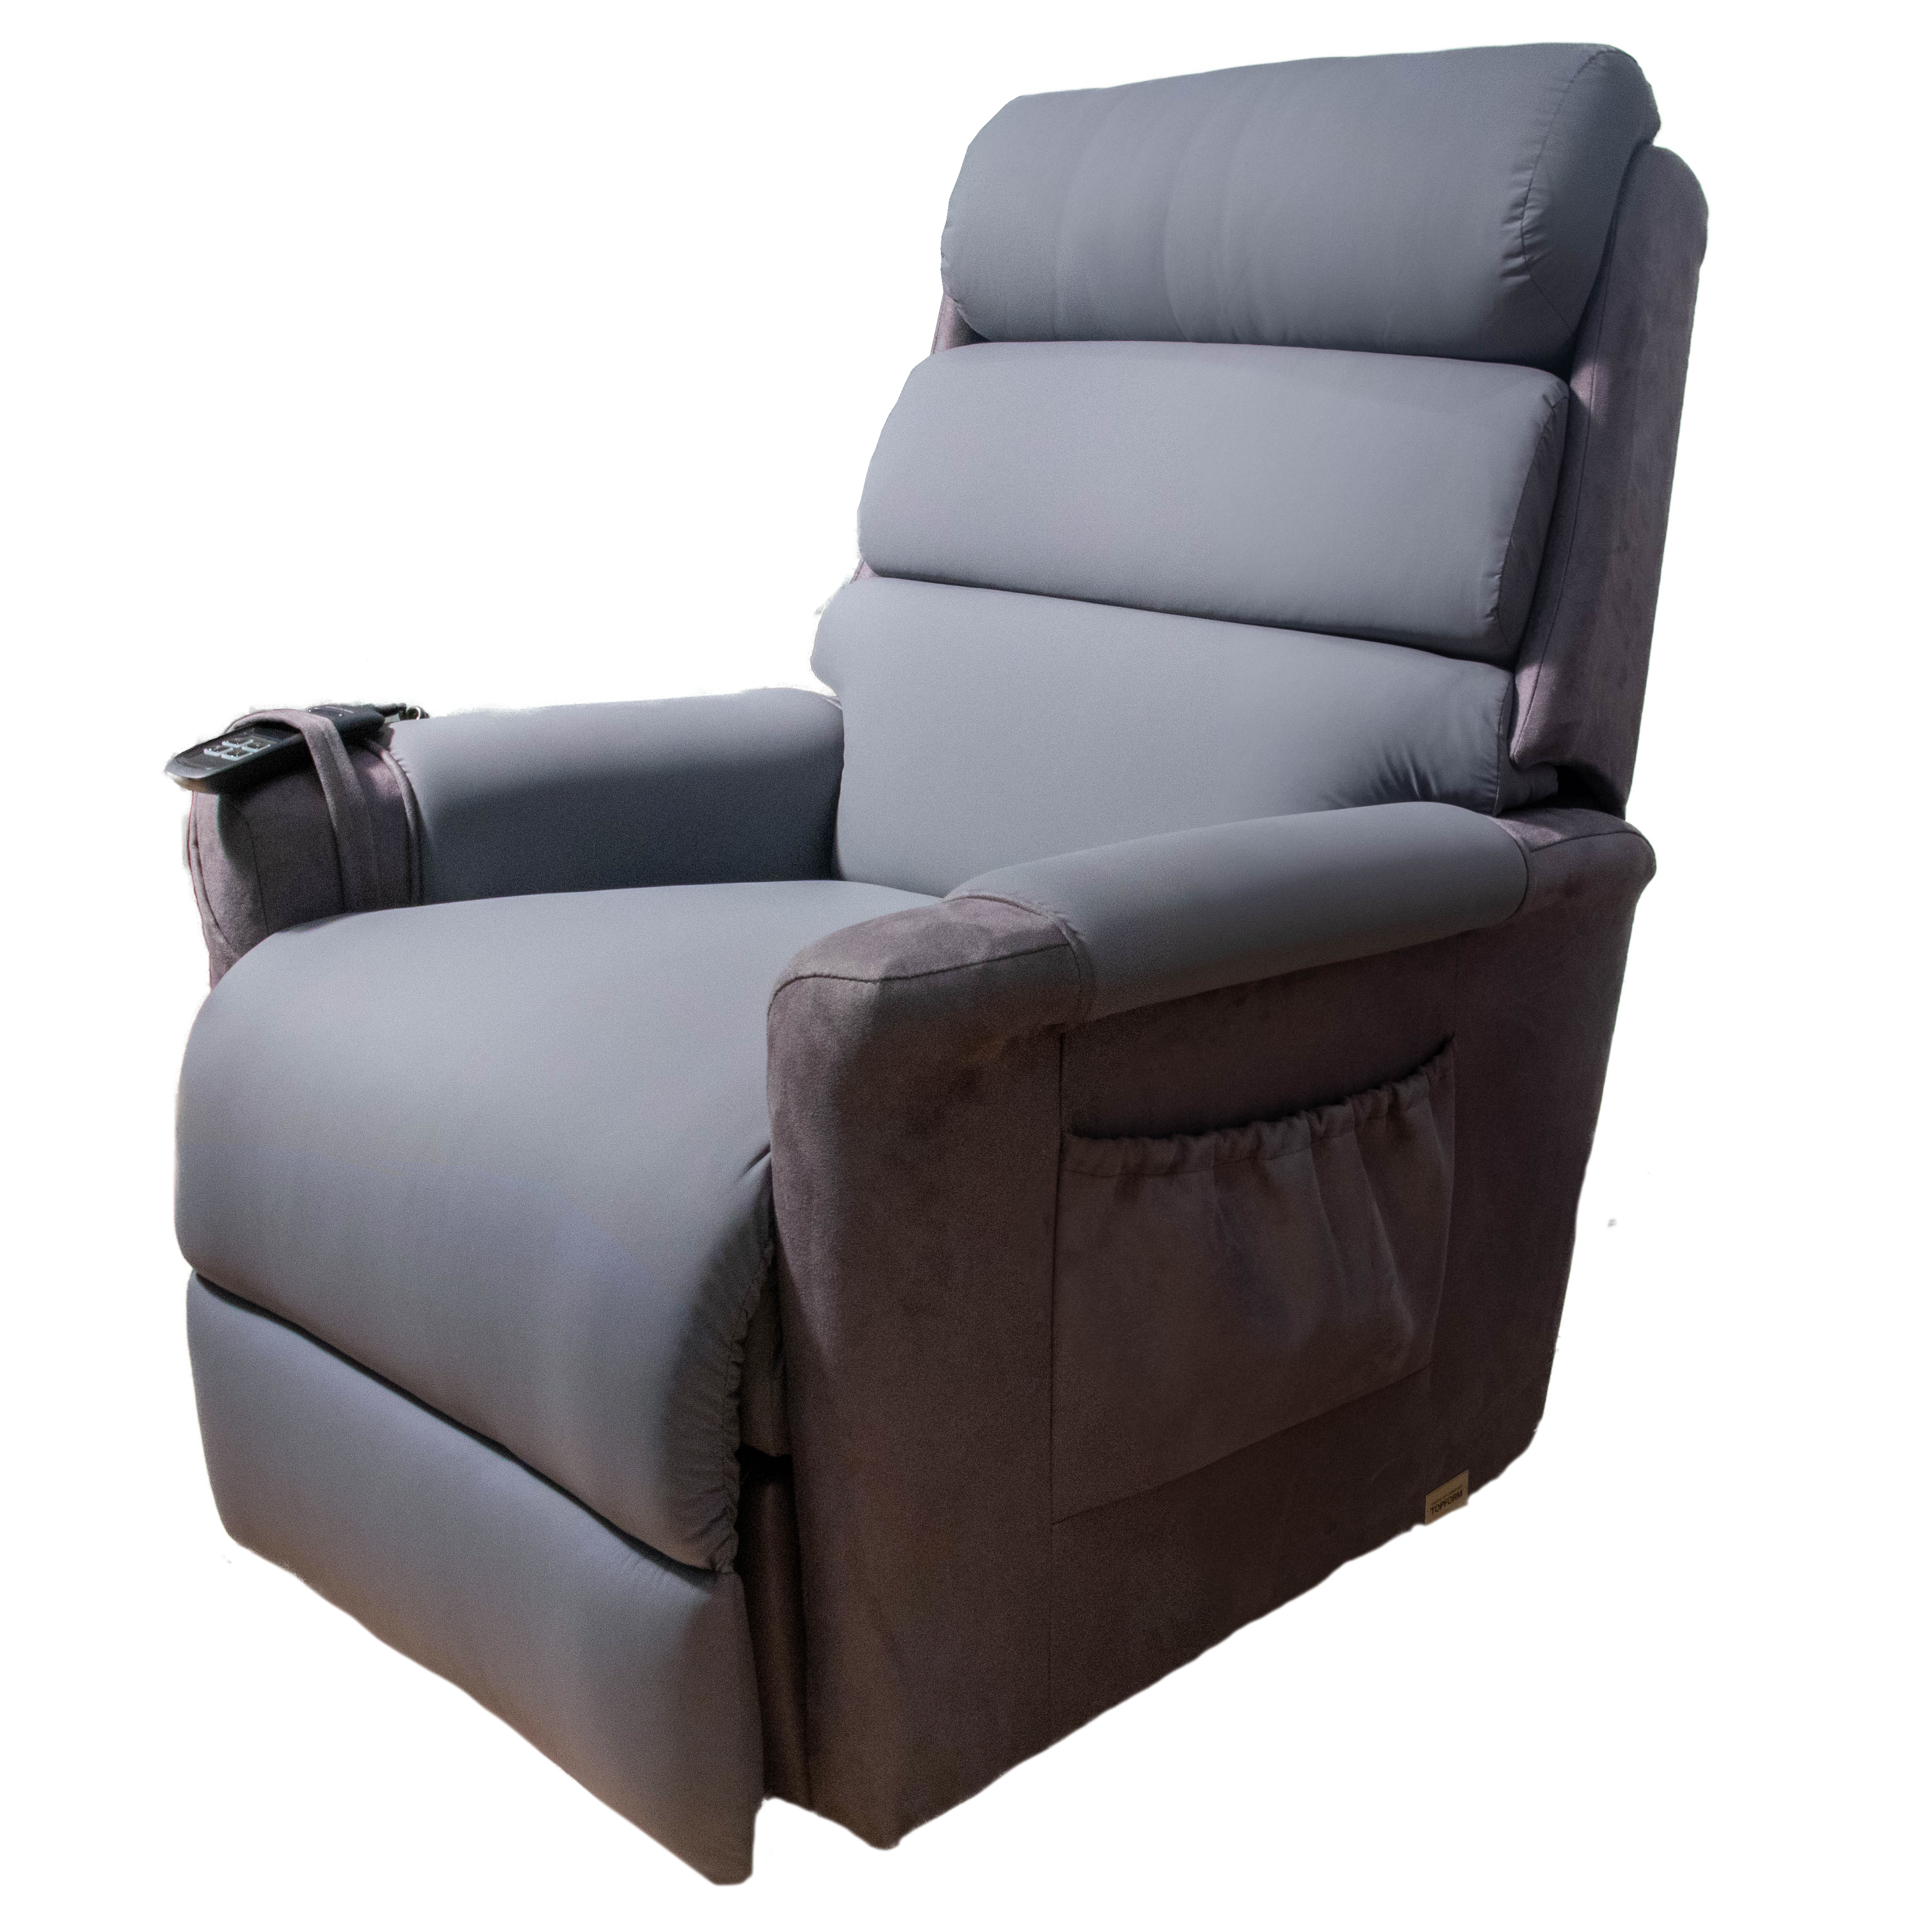 pressure care medical lift chair recliner especially beneficial for people with hight risk of pressure injuries